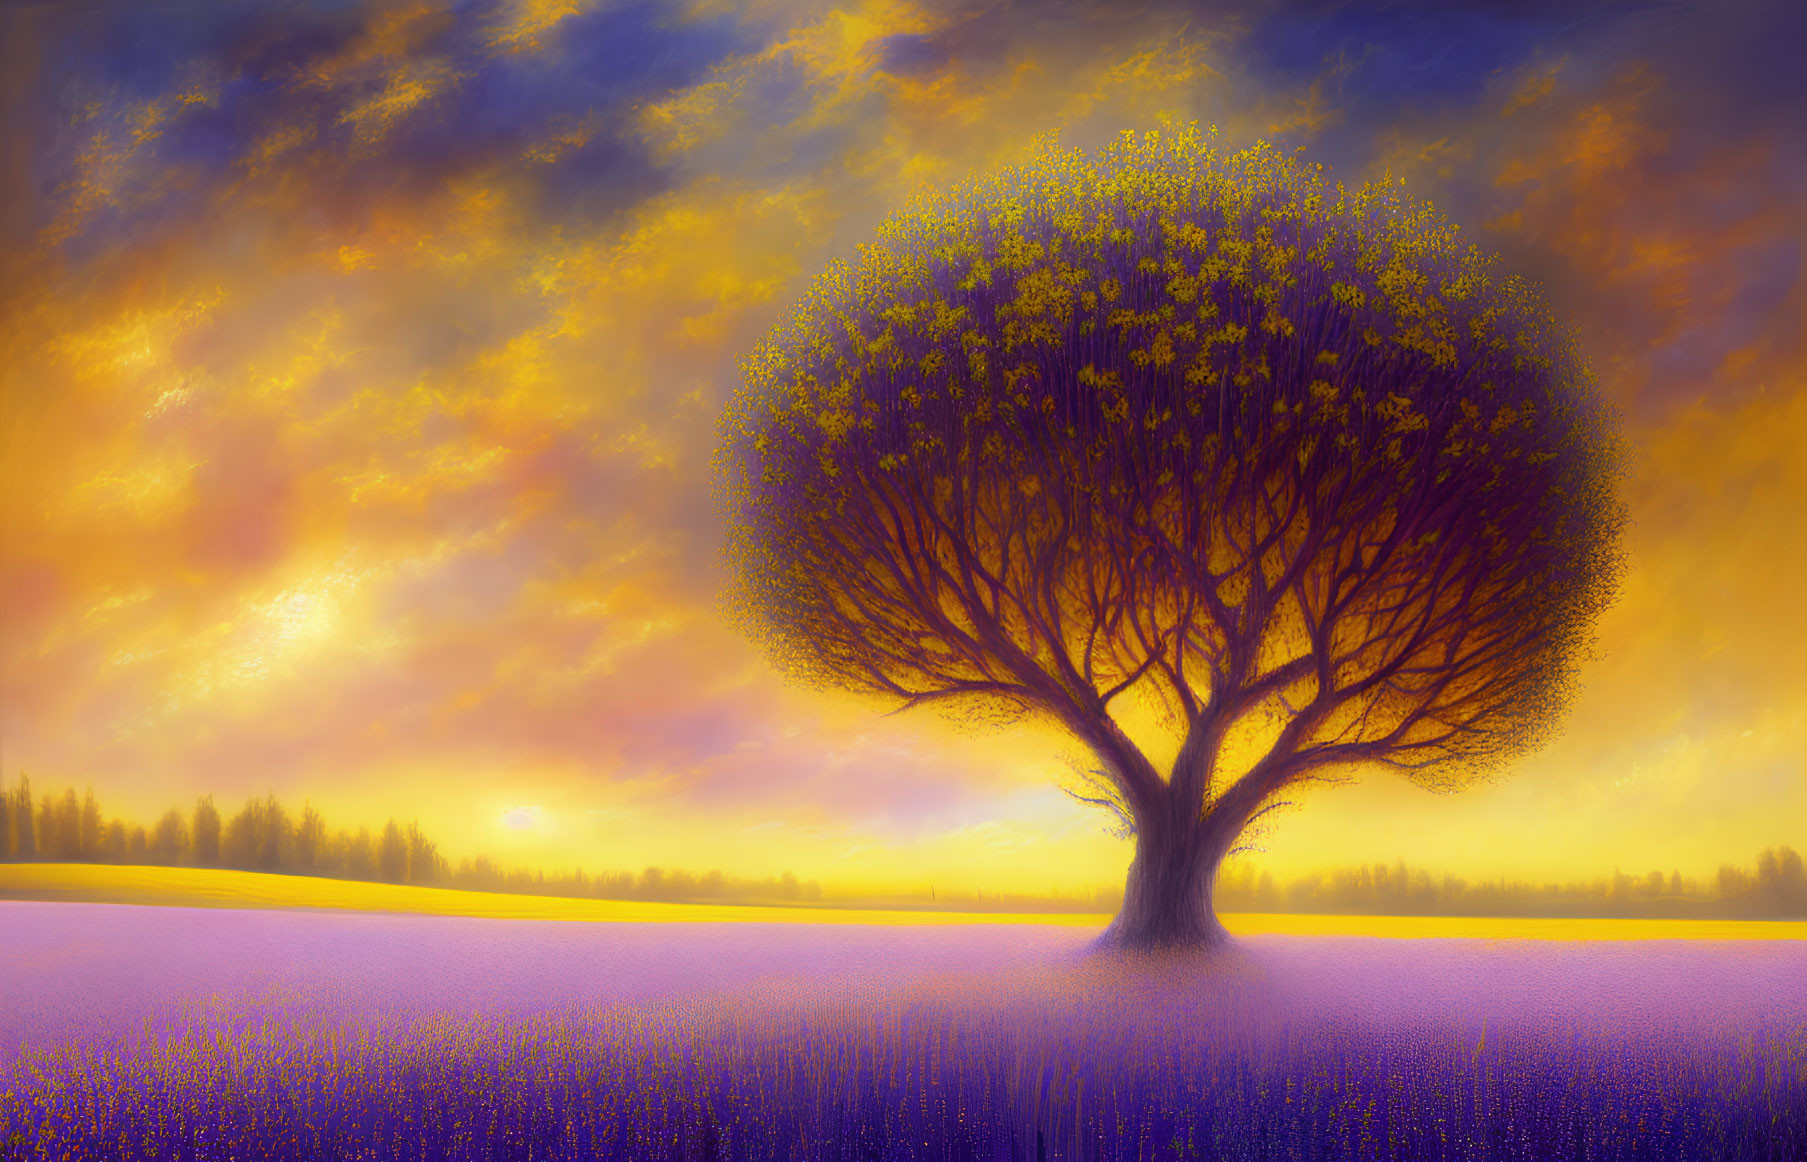 Colorful landscape with lone tree in purple flower field under dramatic sky